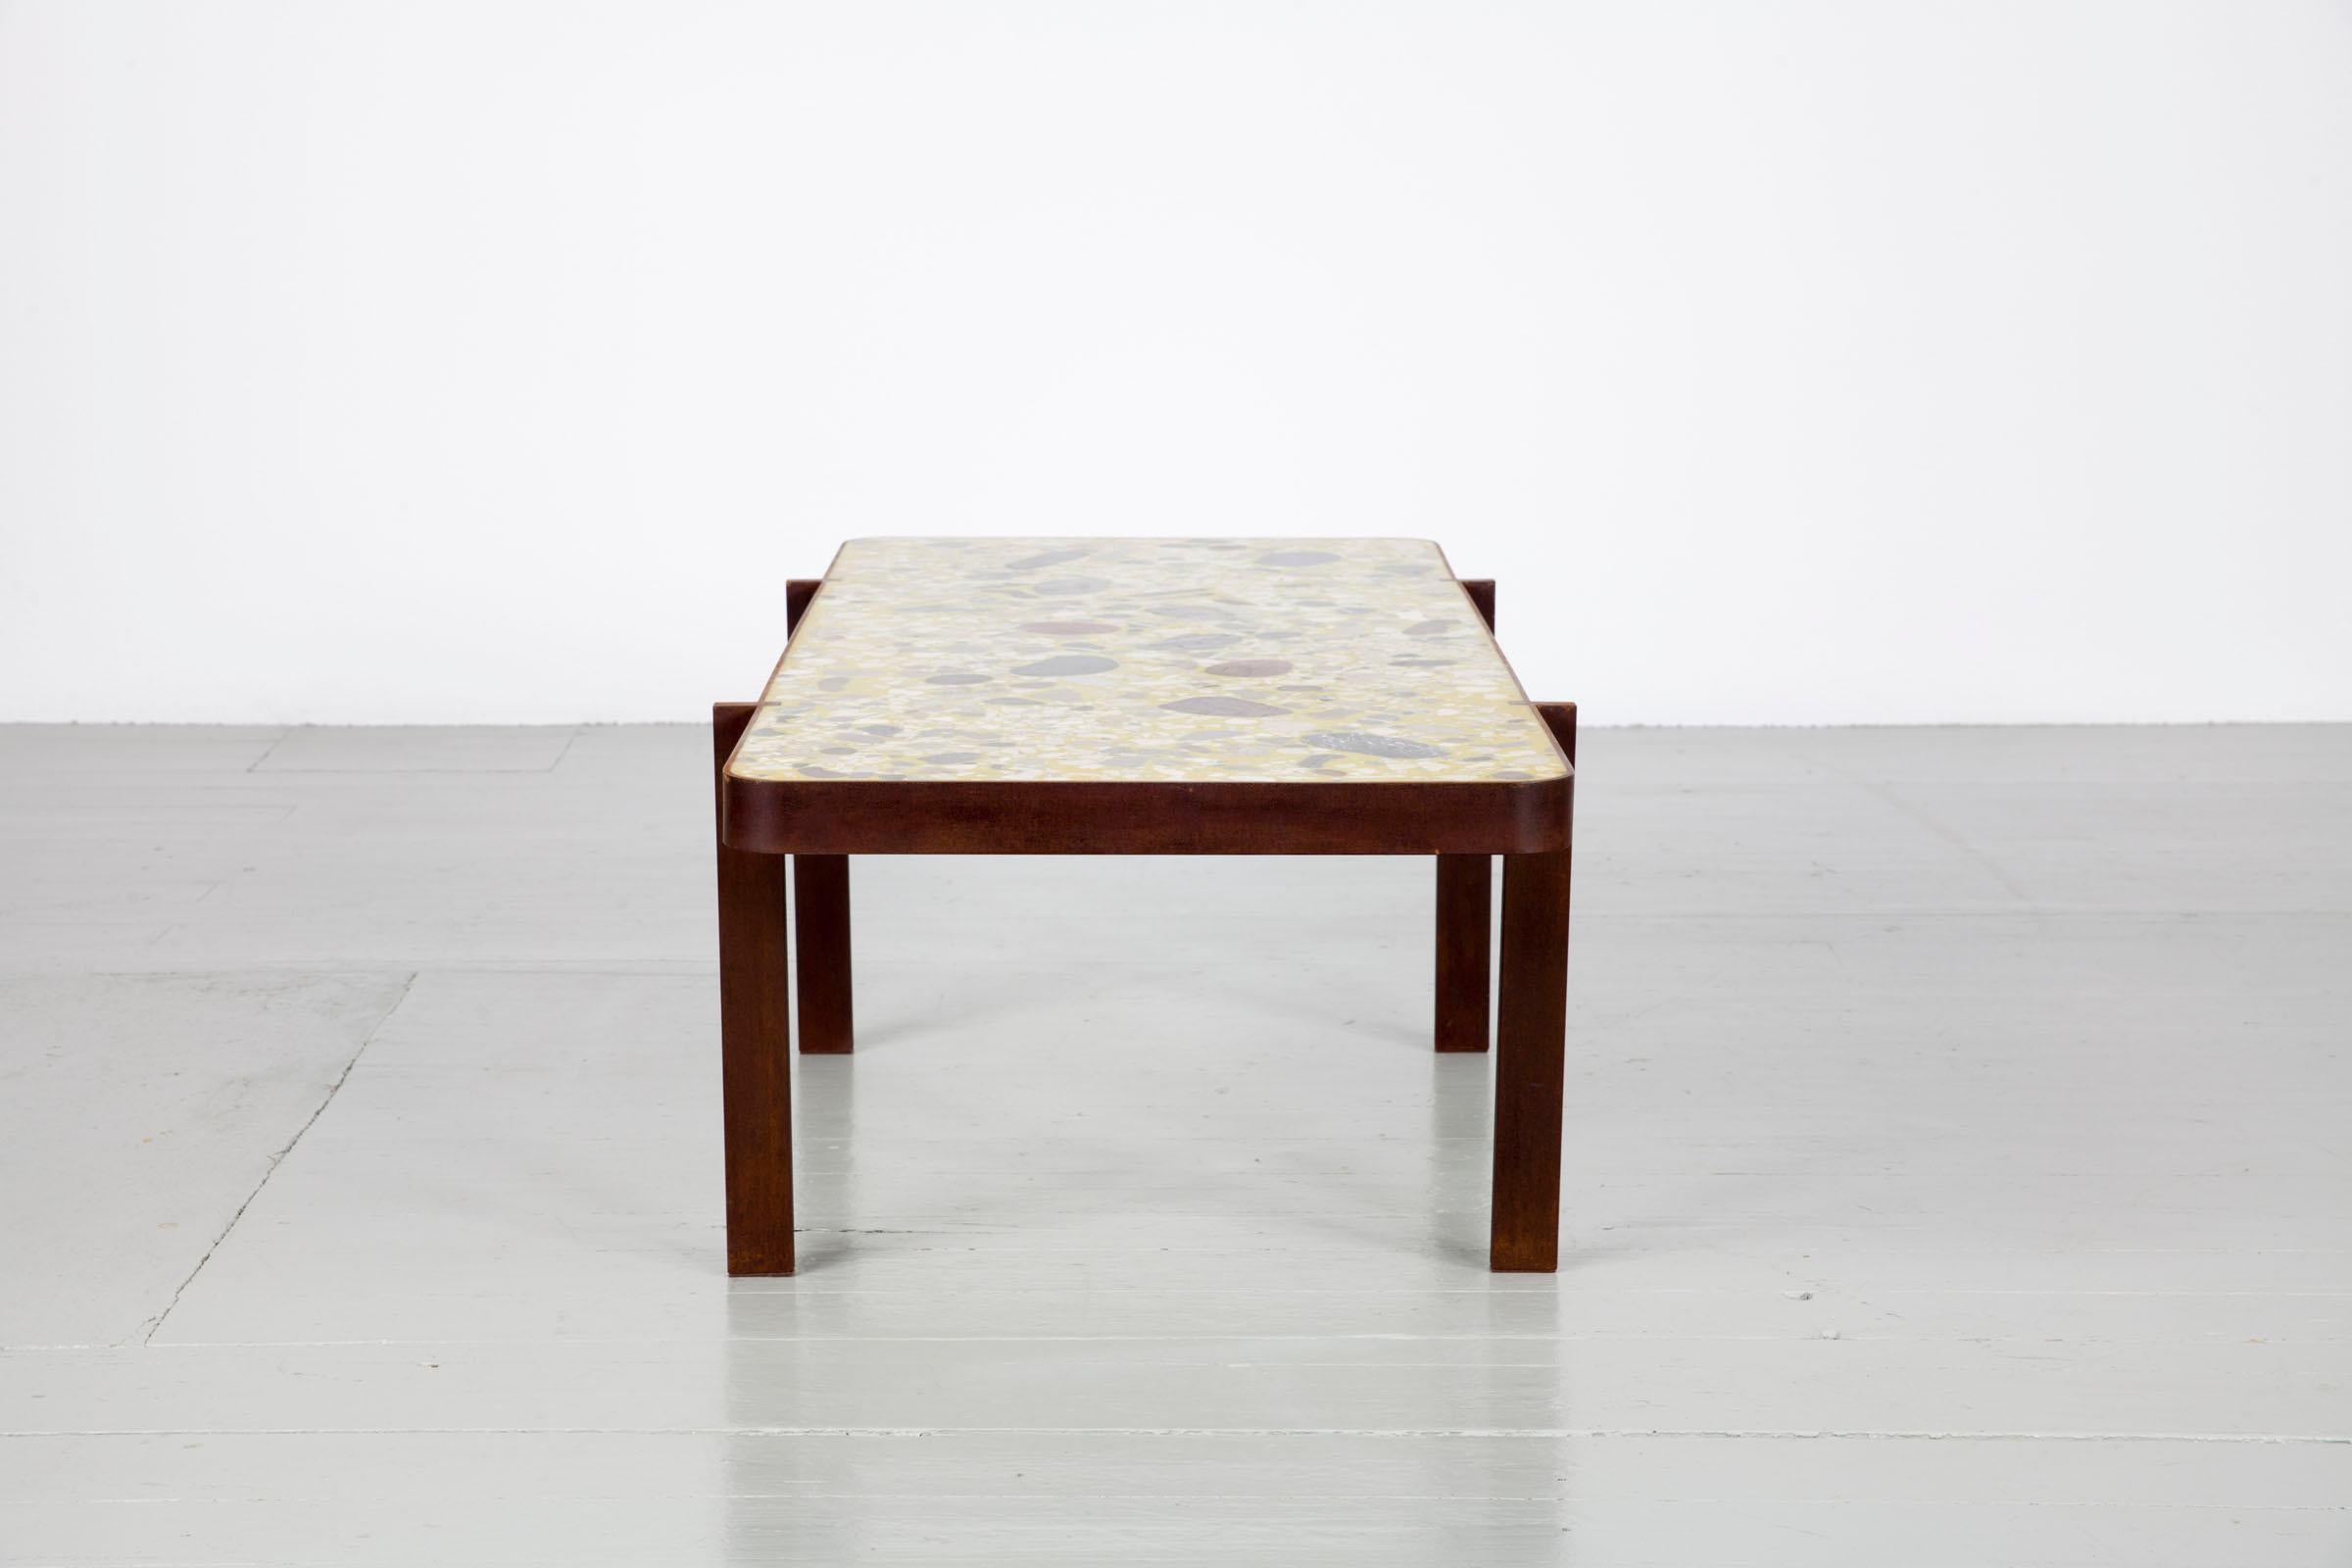 Felix Muhrhofer Contemporary Terrazzo Table with Corroded Steel Construction For Sale 8